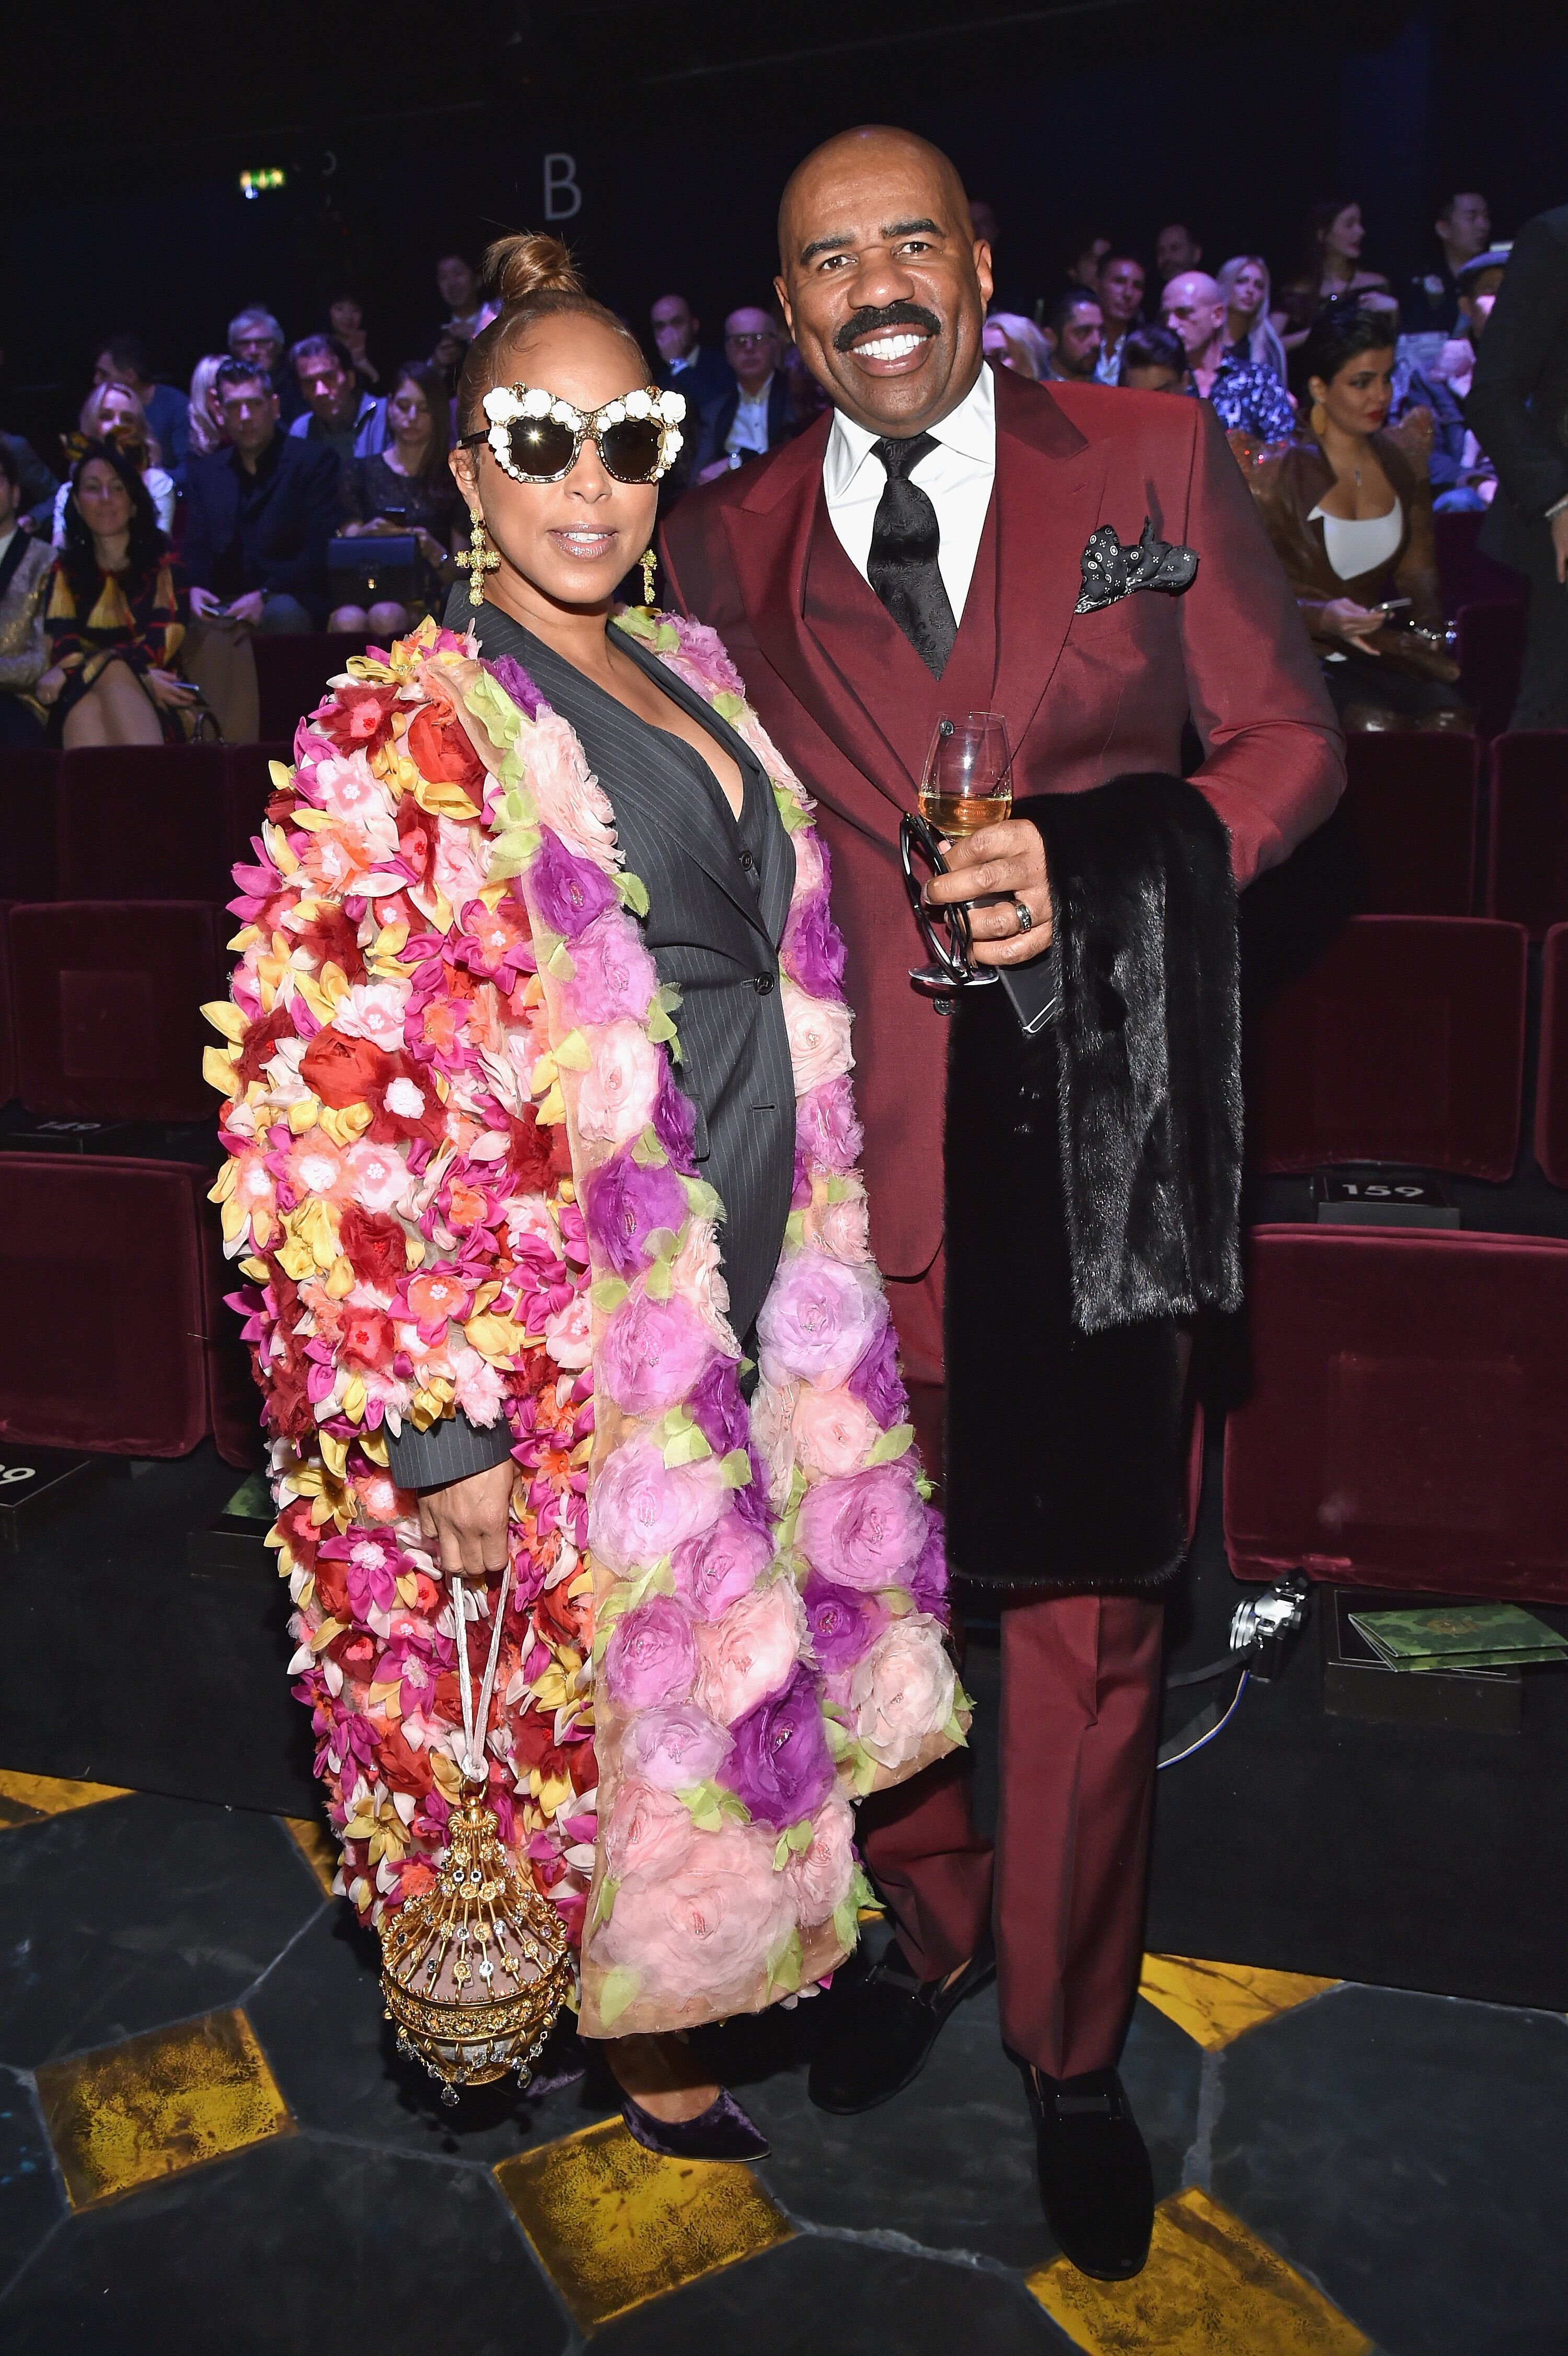 Marjorie Harvey and Steve Harvey attend the Dolce & Gabbana show during Milan Men's Fashion Week Fall/Winter 2017/18 on January 14, 2017. | Photo: Getty Images